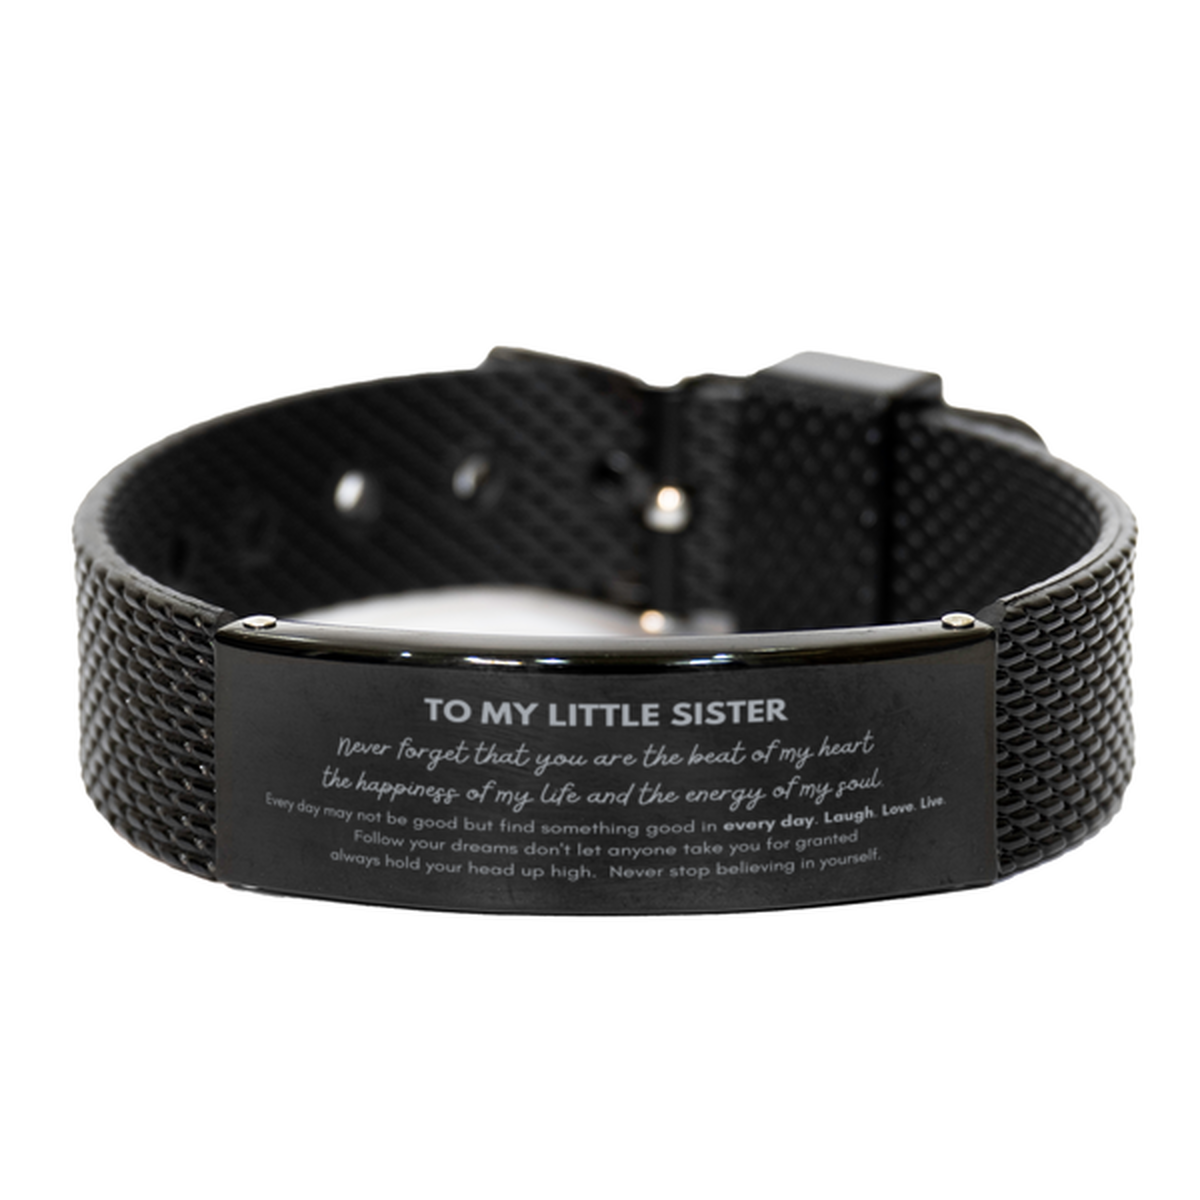 To My Little Sister Bracelet Gifts, Christmas Little Sister Black Shark Mesh Bracelet Present, Birthday Unique Motivational For Little Sister, To My Little Sister Never forget that you are the beat of my heart the happiness of my life and the energy of my